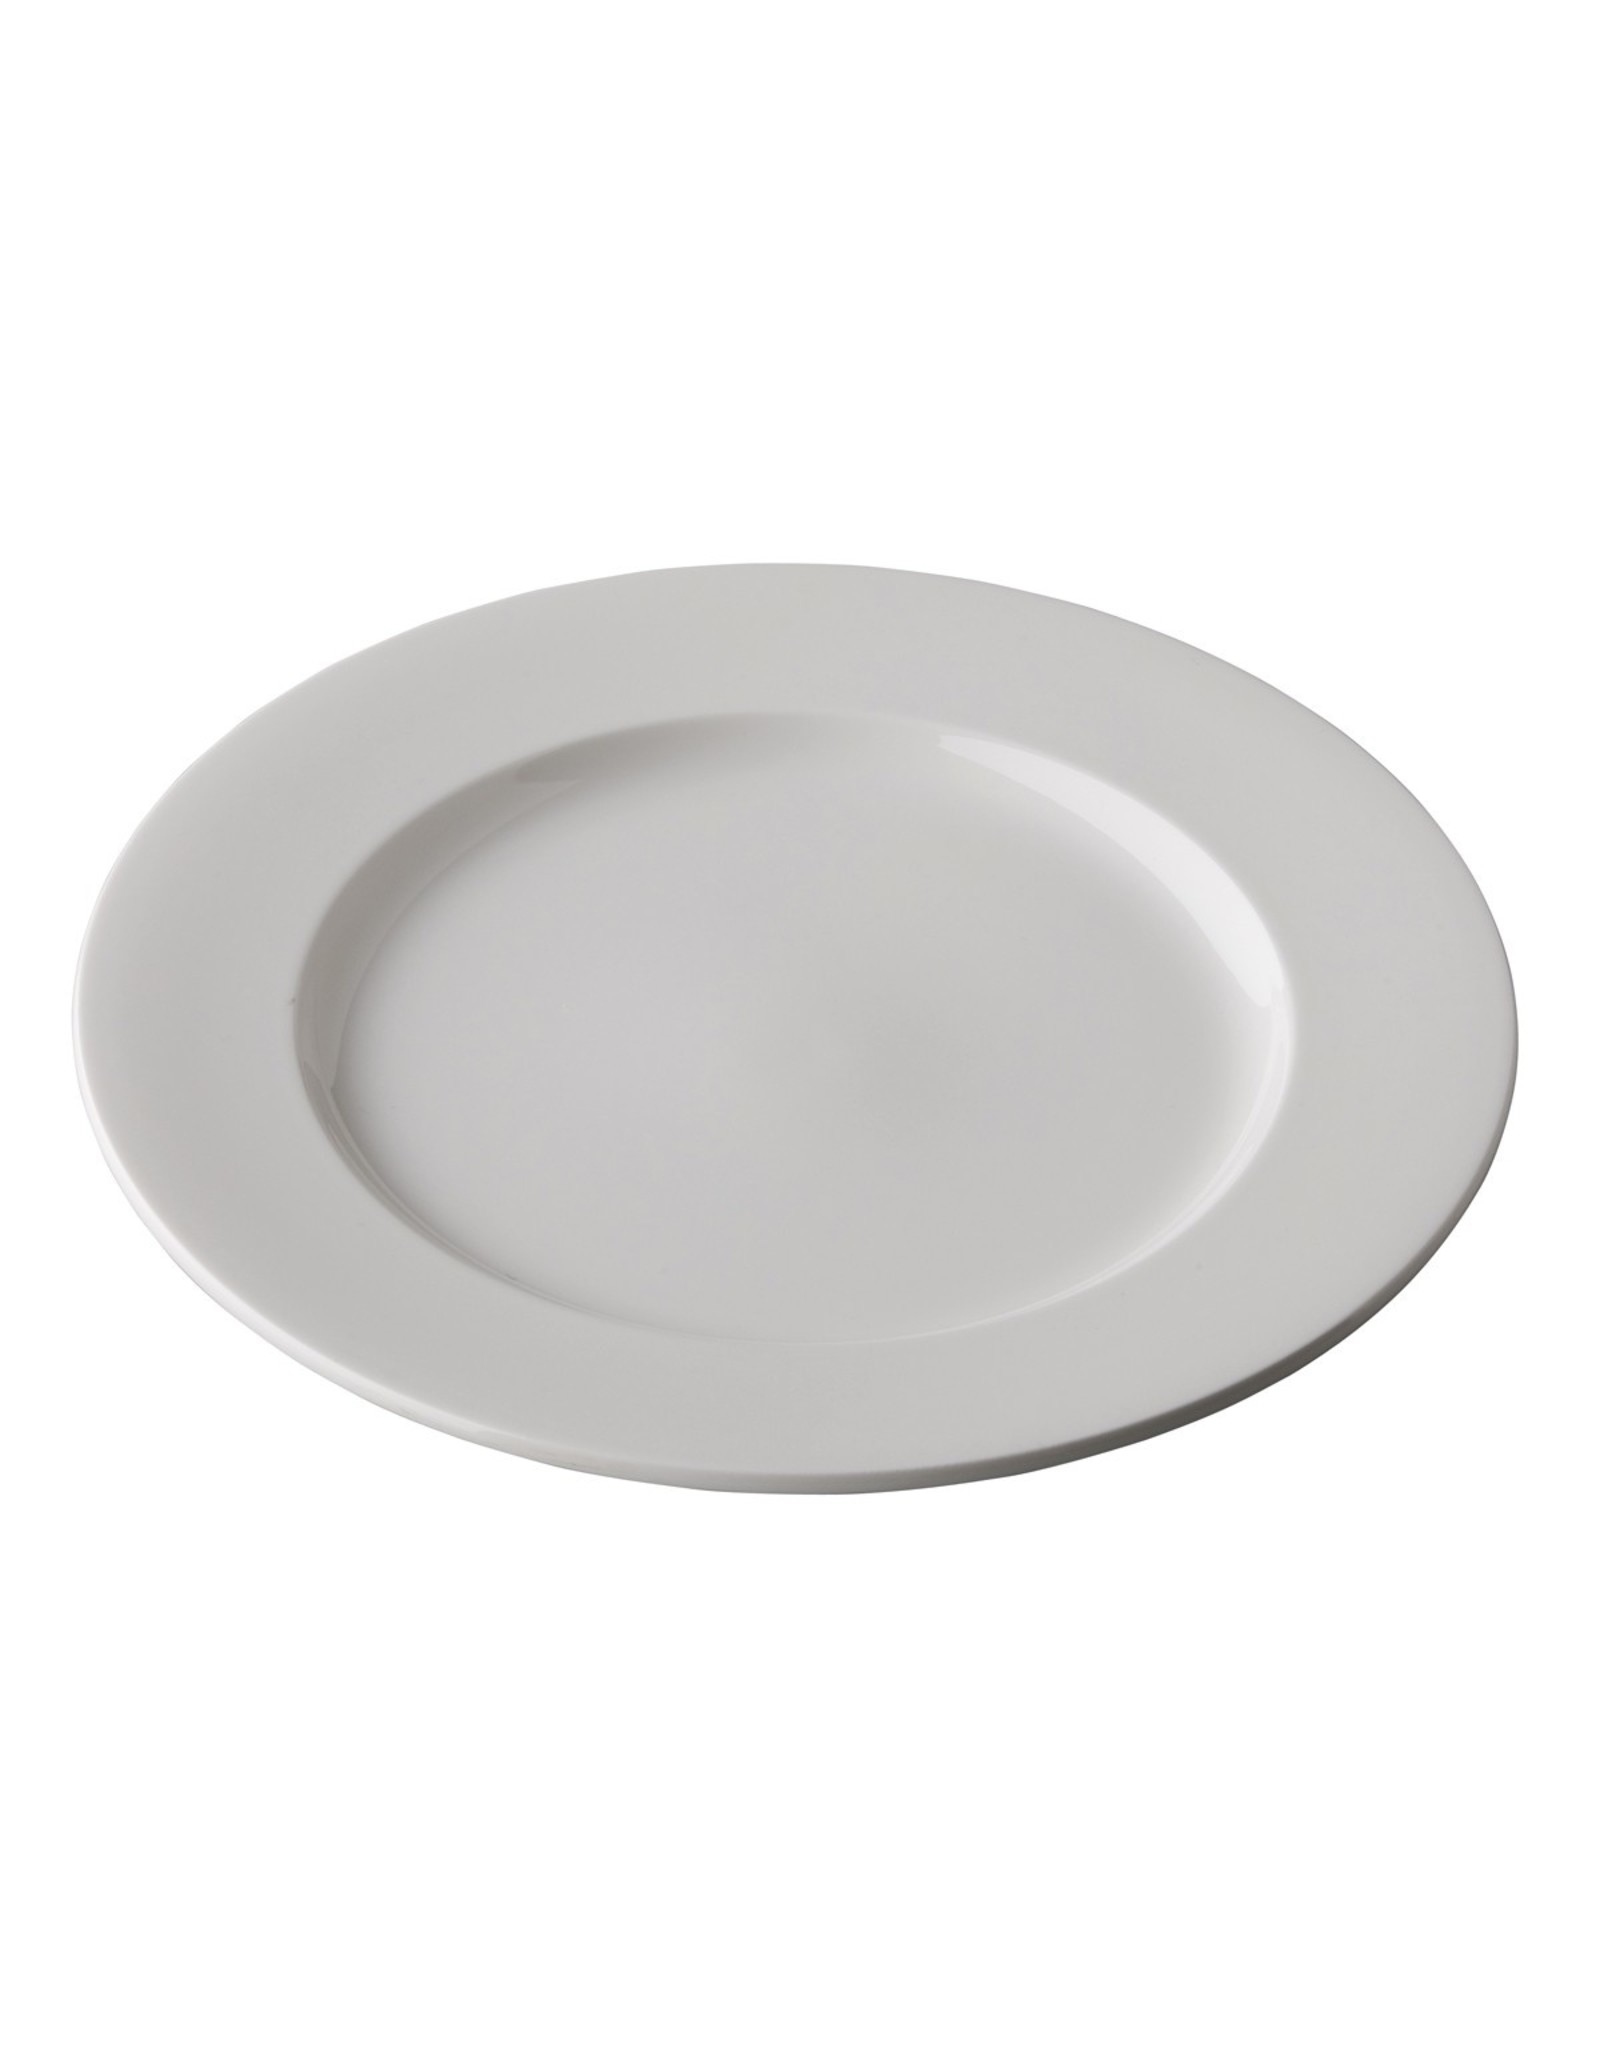 Stylepoint Q Fine China rimmed plate 28 cm